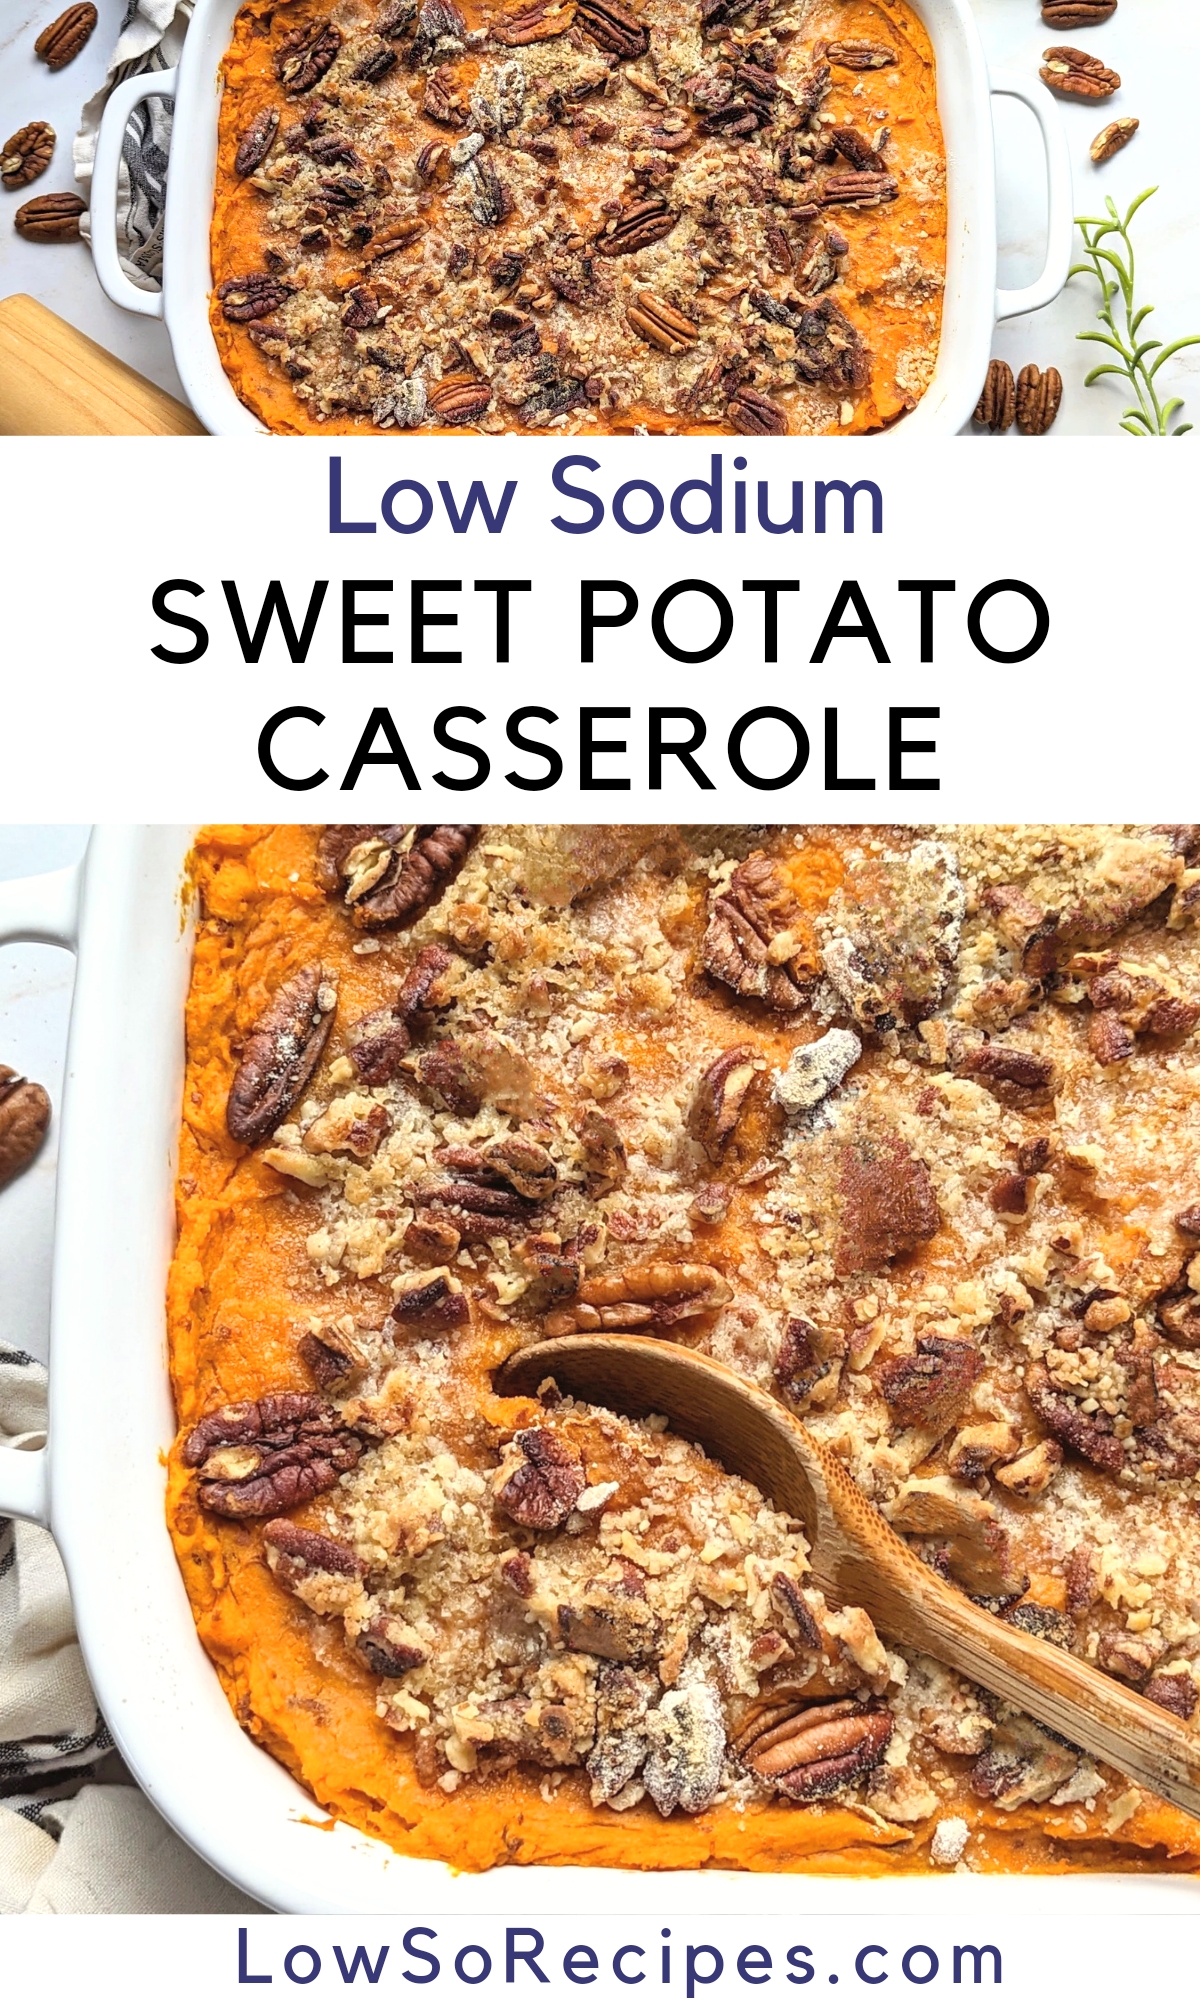 low sodium sweet potato casserole recipe with unsalted butter whole sweet potatoes with or without the peel, pecans, and brown sugar, marshmallows optional